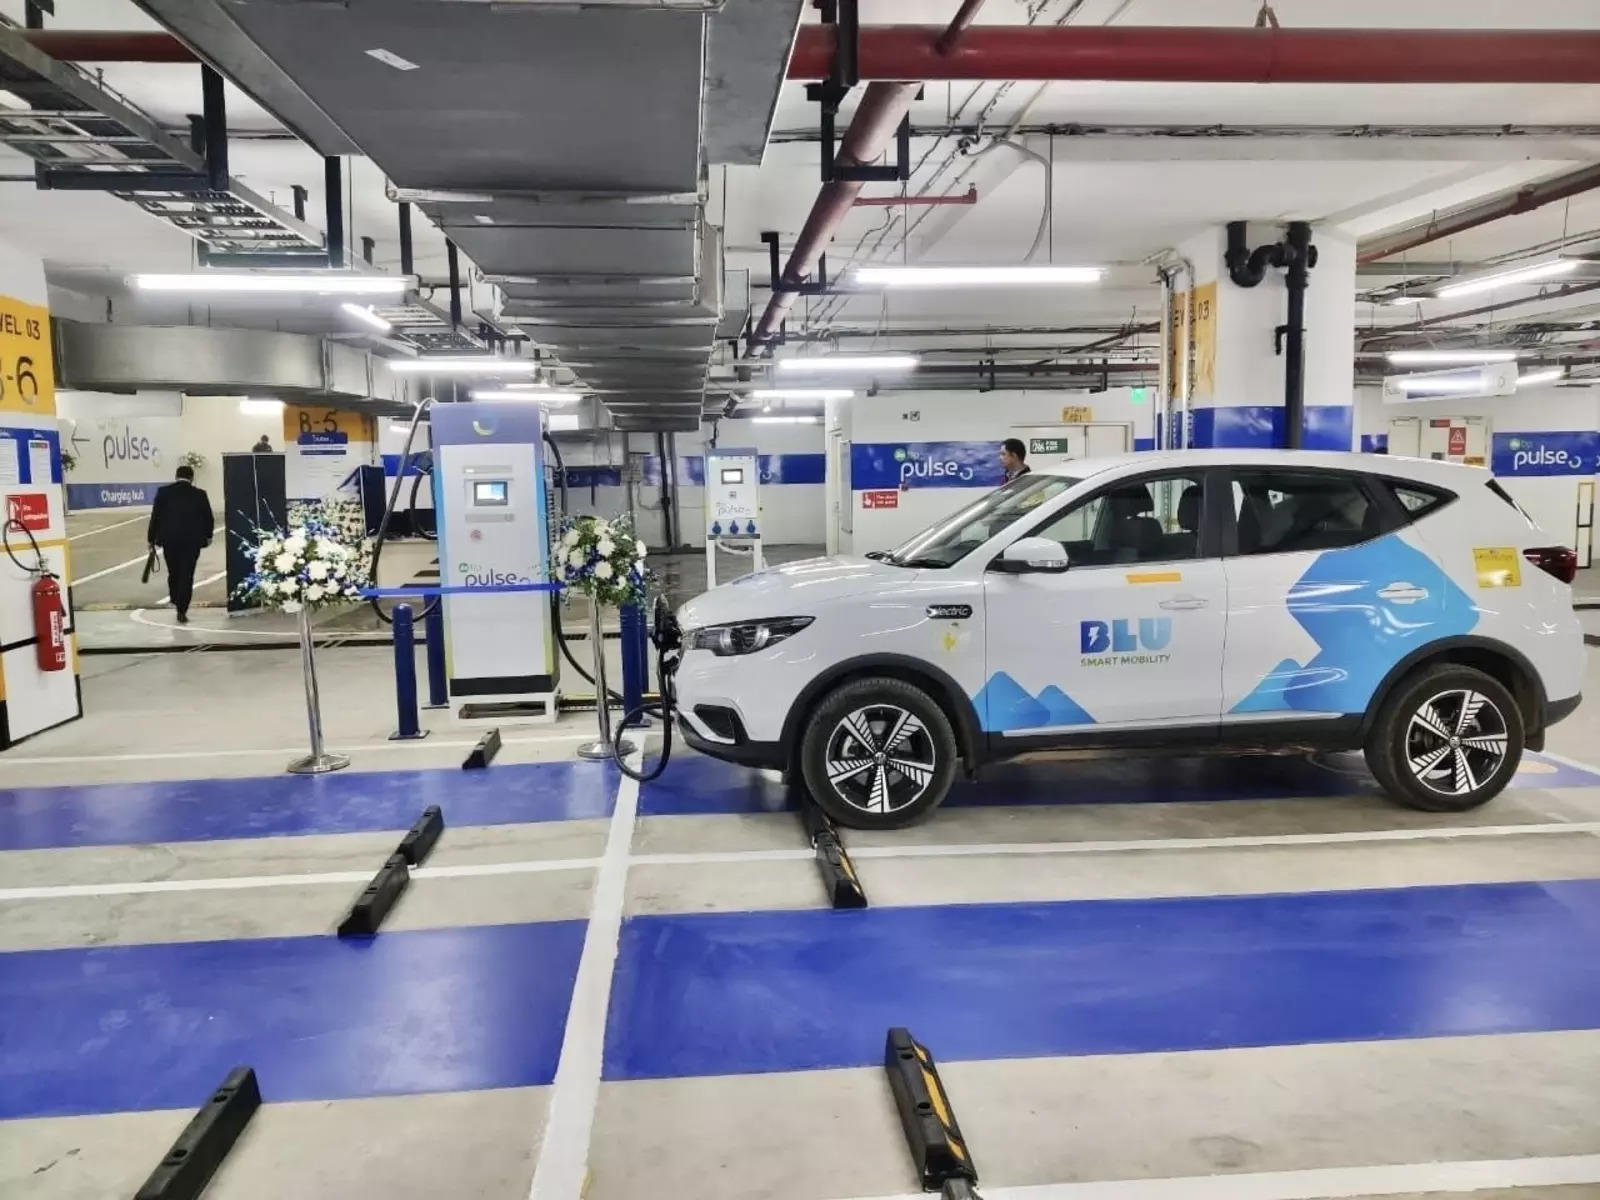 BluSmart gears up to install EV charging infra projects across India in PPP mode